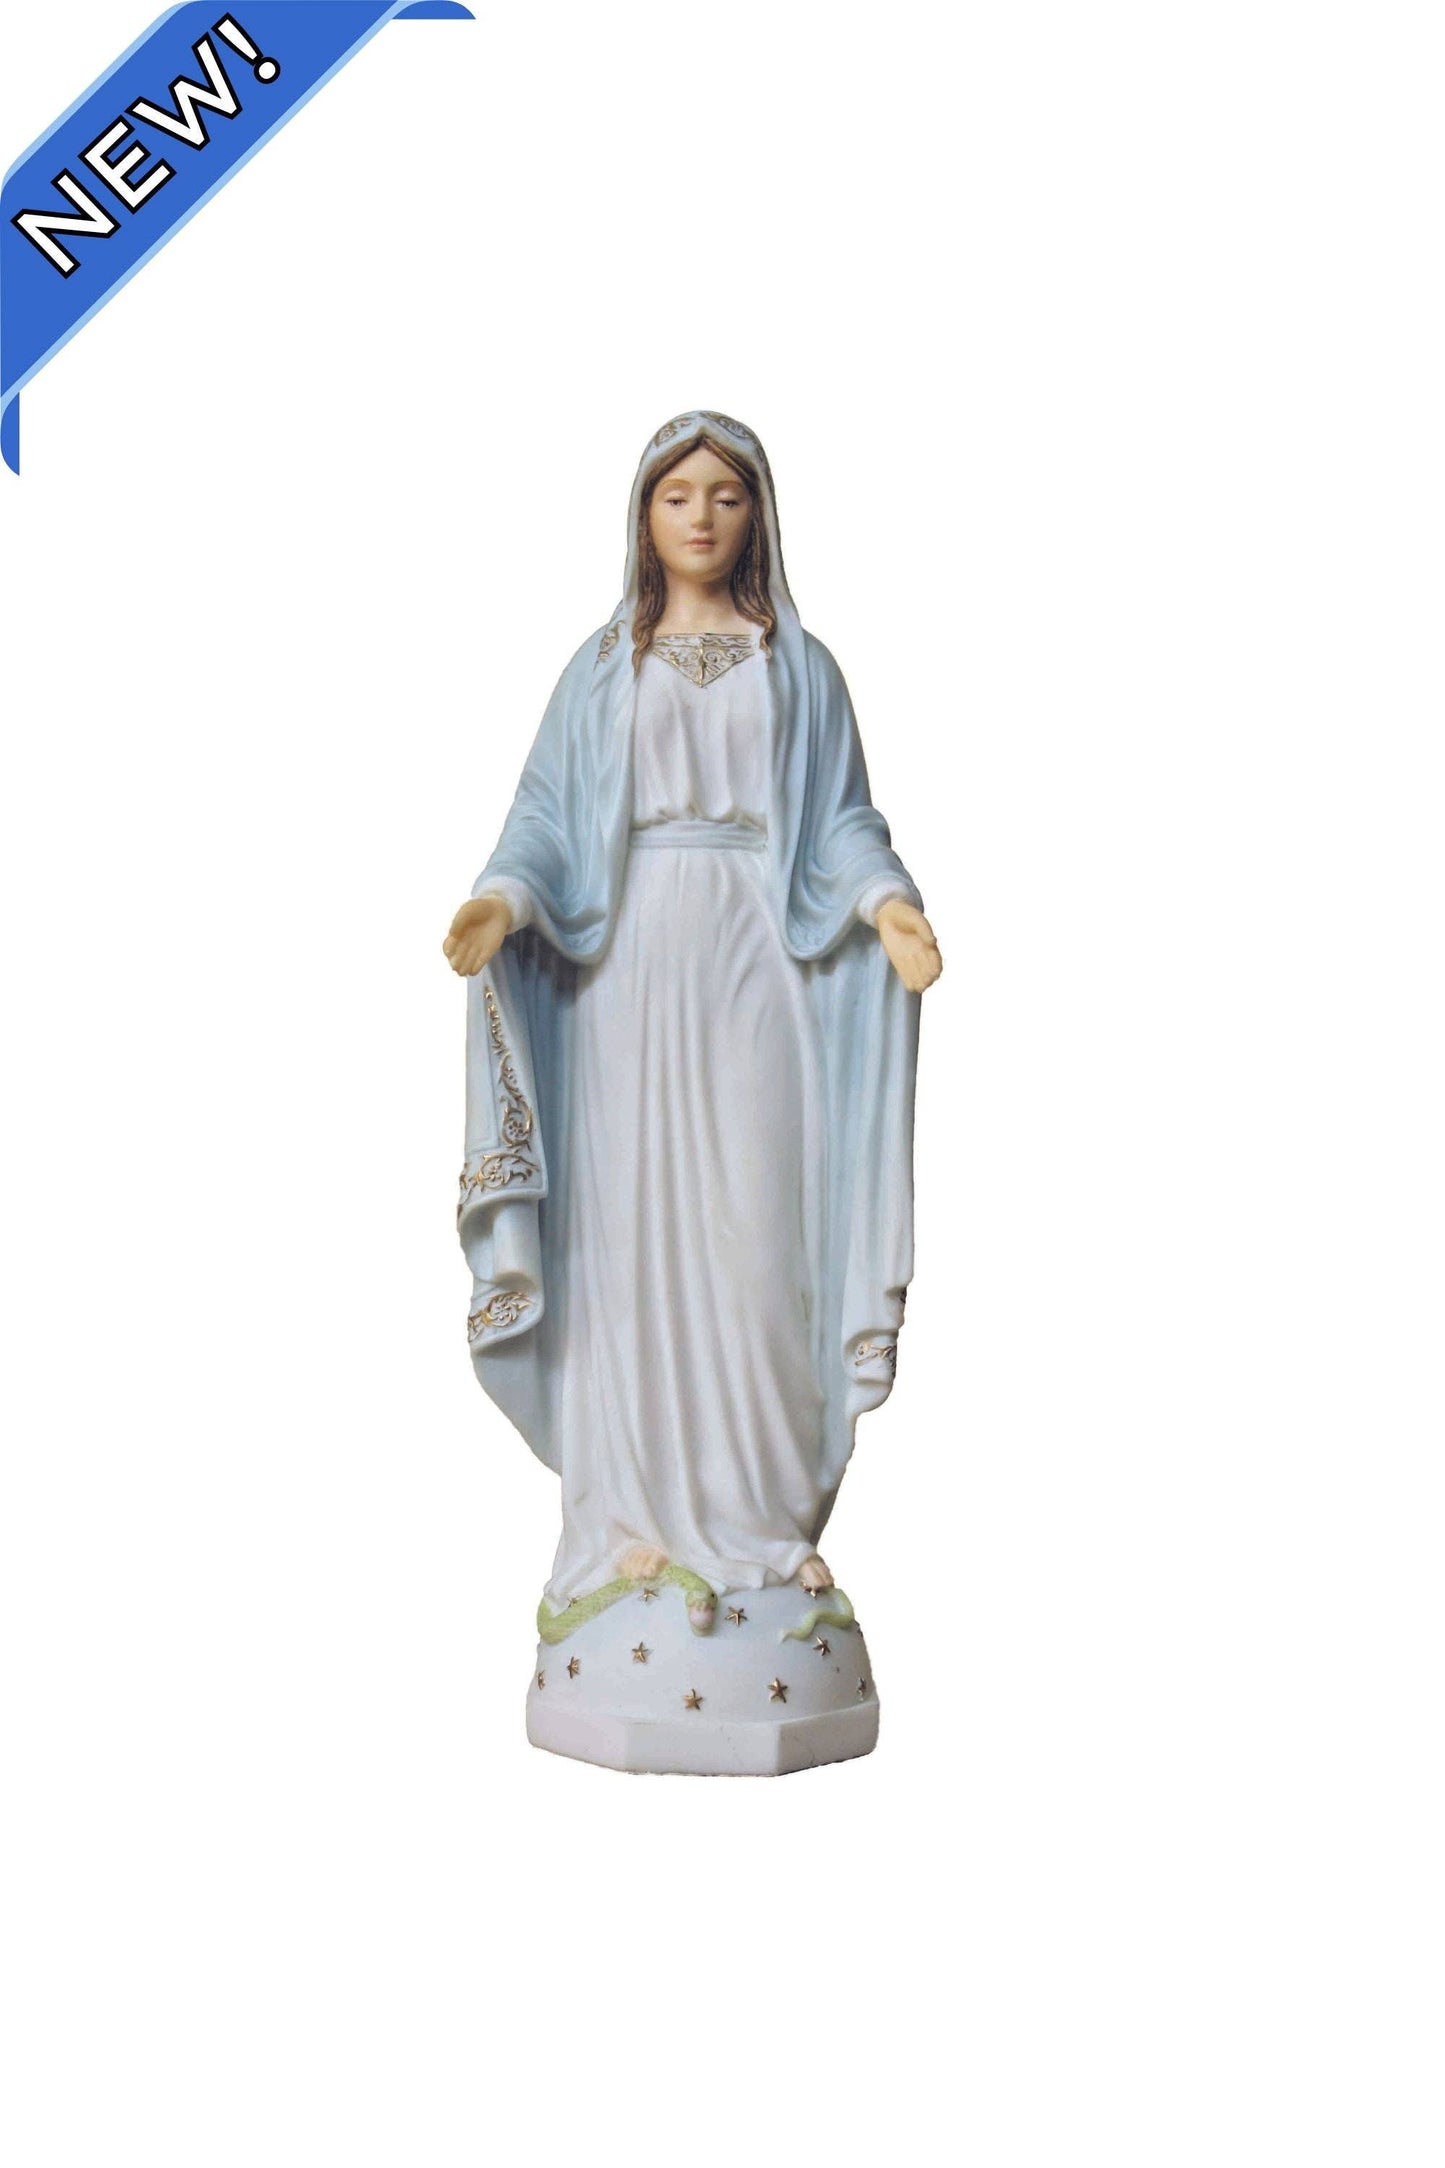 Lady of Grace in White/Painted Features 9"